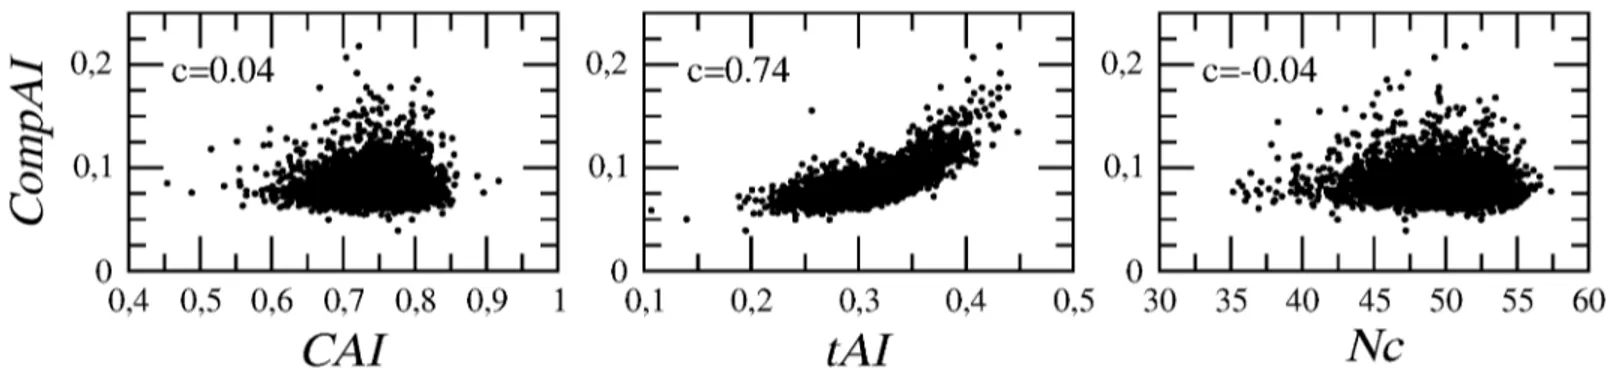 Fig 1. Correlation between codon bias indices. Values of Pearson ’s correlation coefficients show that CompAI is strongly and positively correlated with tAI (c = 0.74), but not with both CAI nor Nc (c ’ 0).